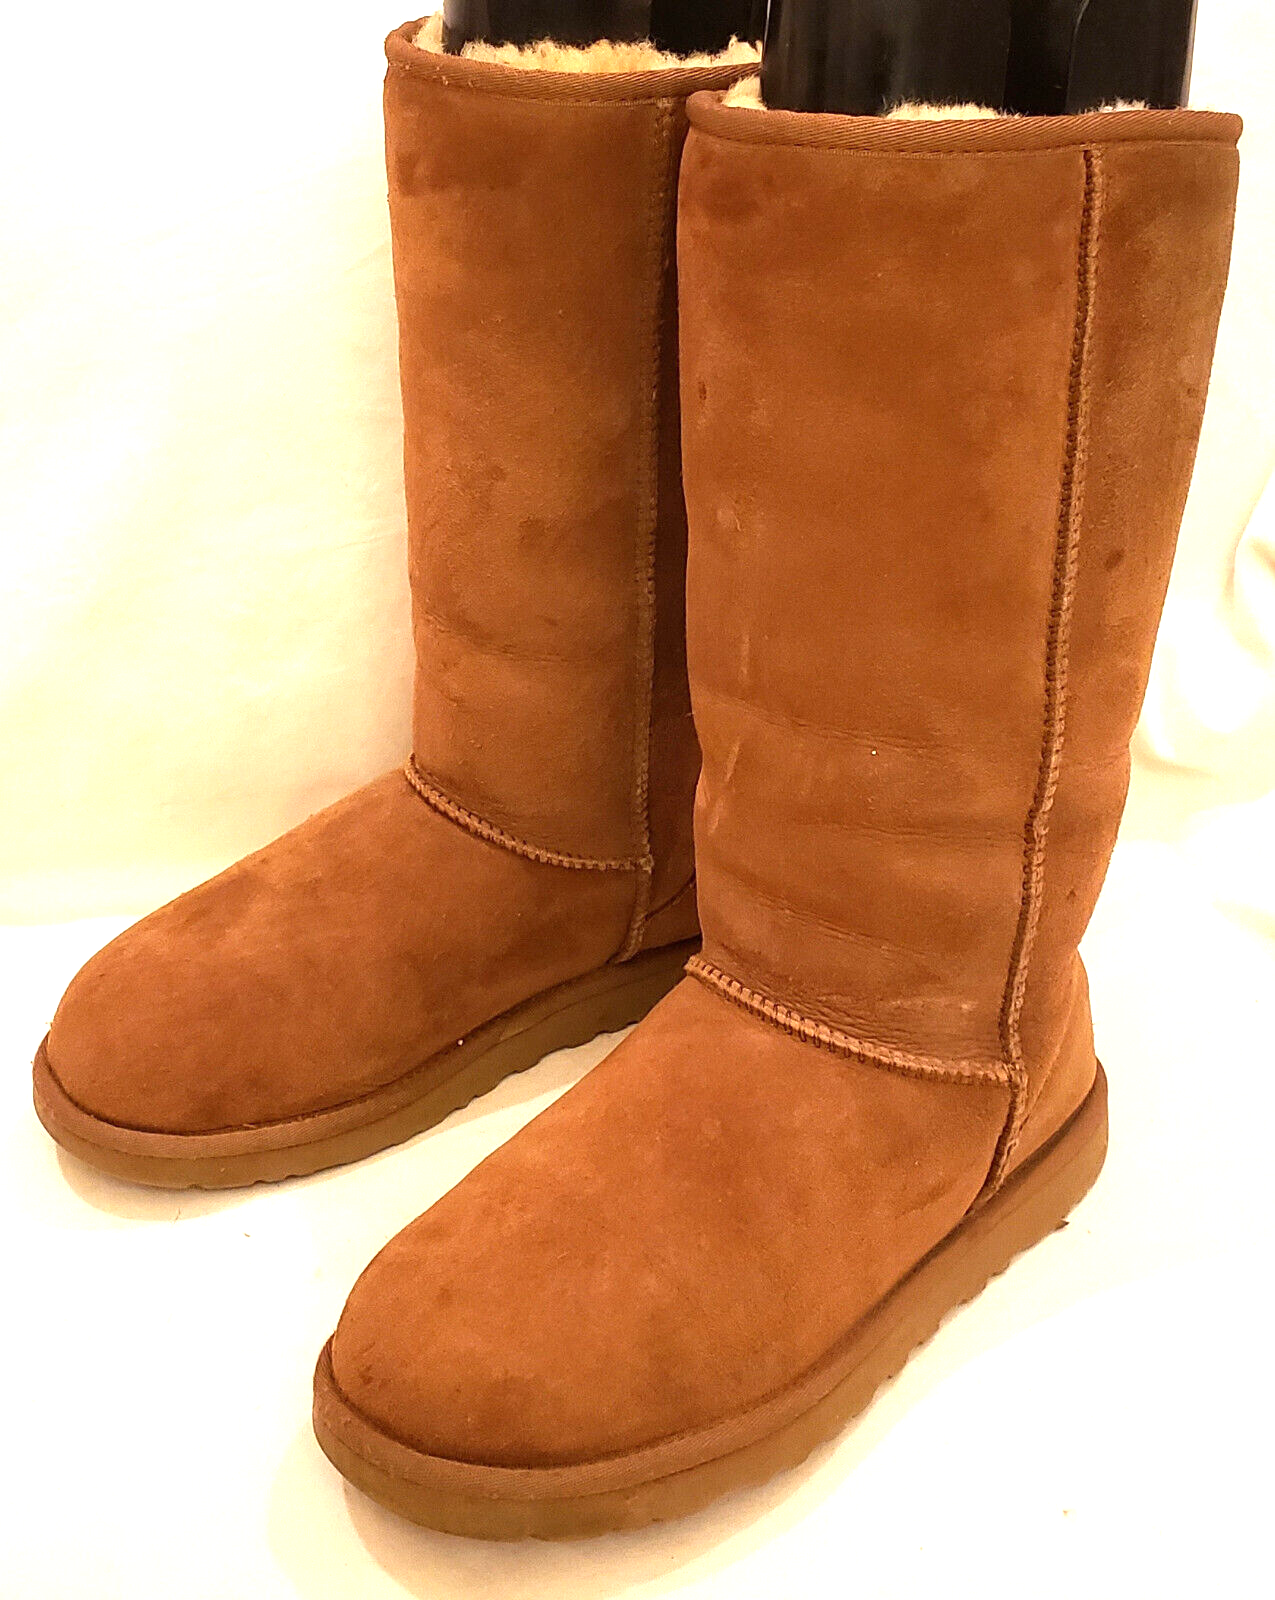 Primary image for UGG Australia Classic Tall Knee High Boots Sz-8 Leather/Suede Sheepskin Inside